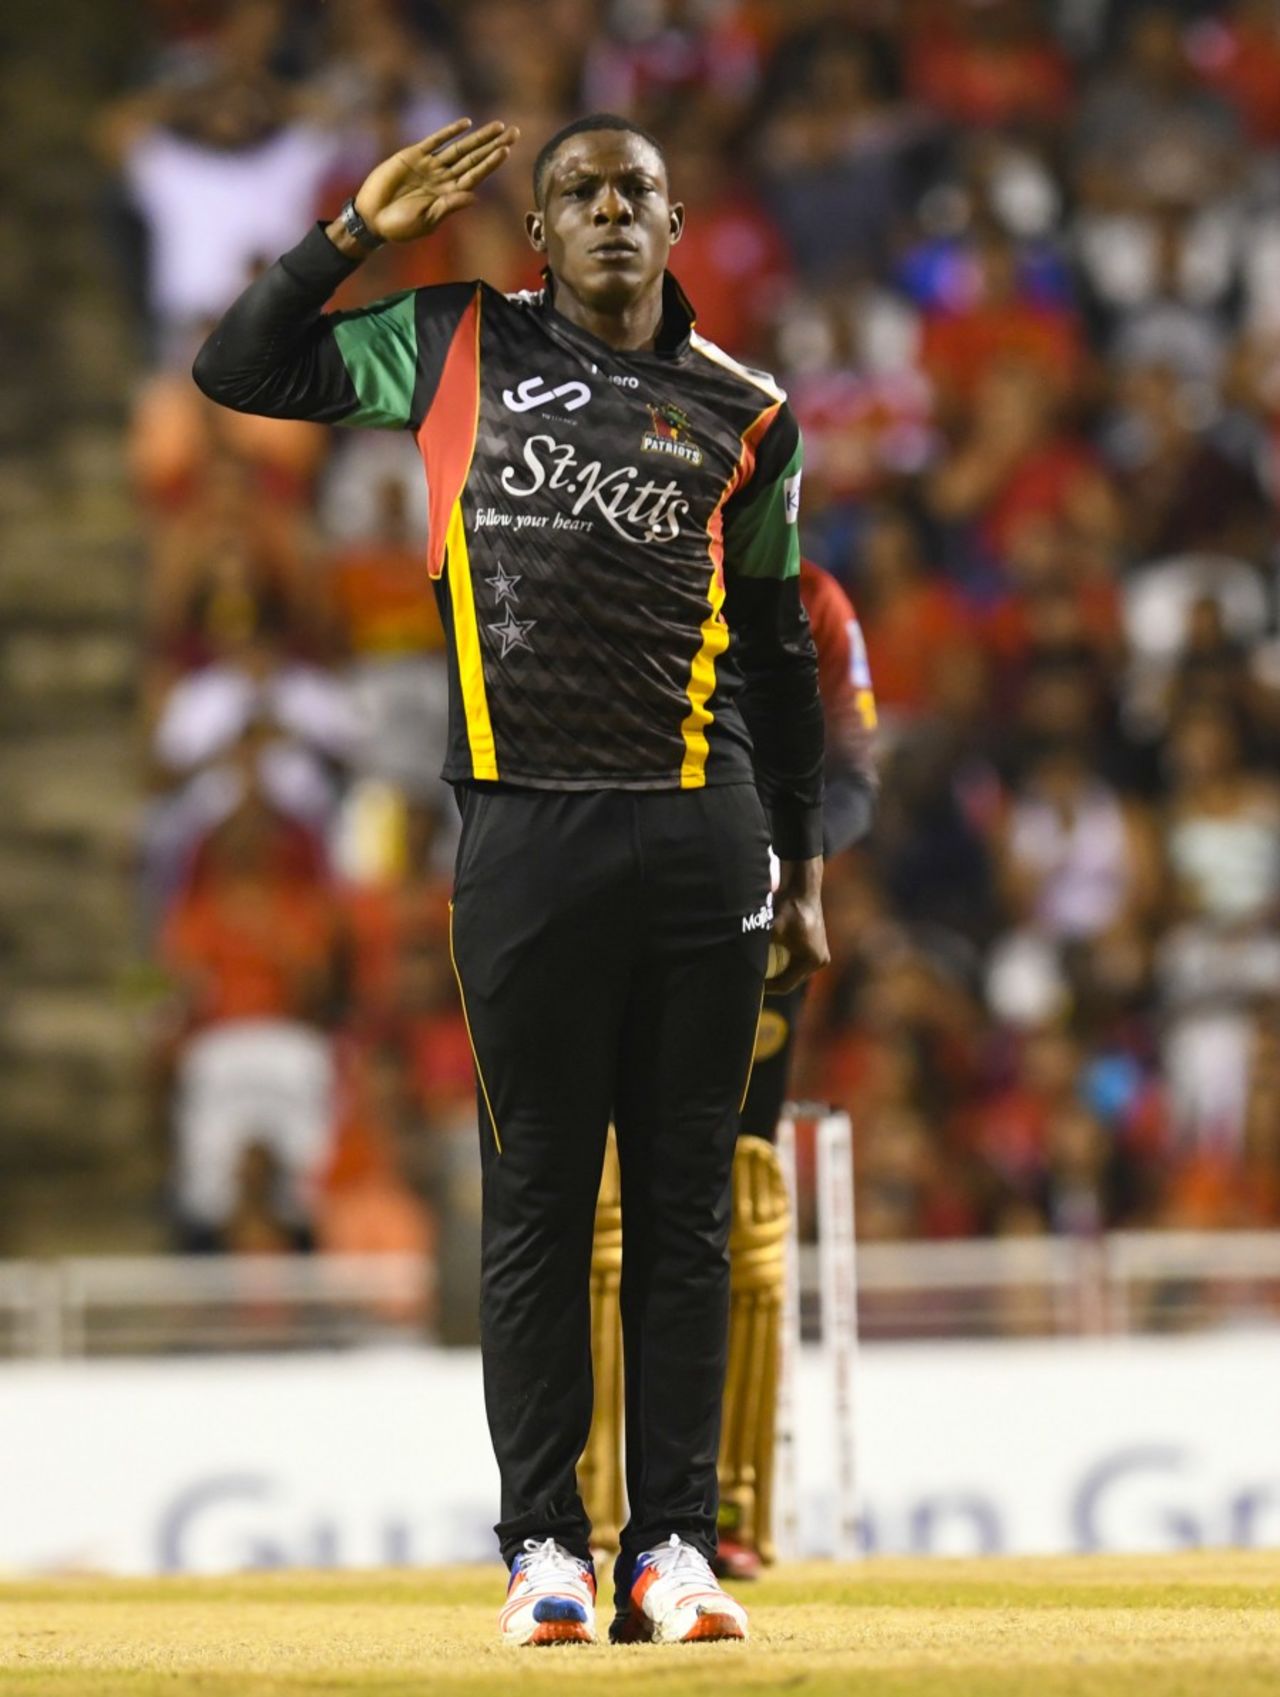 Sheldon Cottrell brings out his trademark salute, Trinbago Knight Riders v St Kitts and Nevis Patriots, CPL 2017, final, Tarouba, September 9, 2017